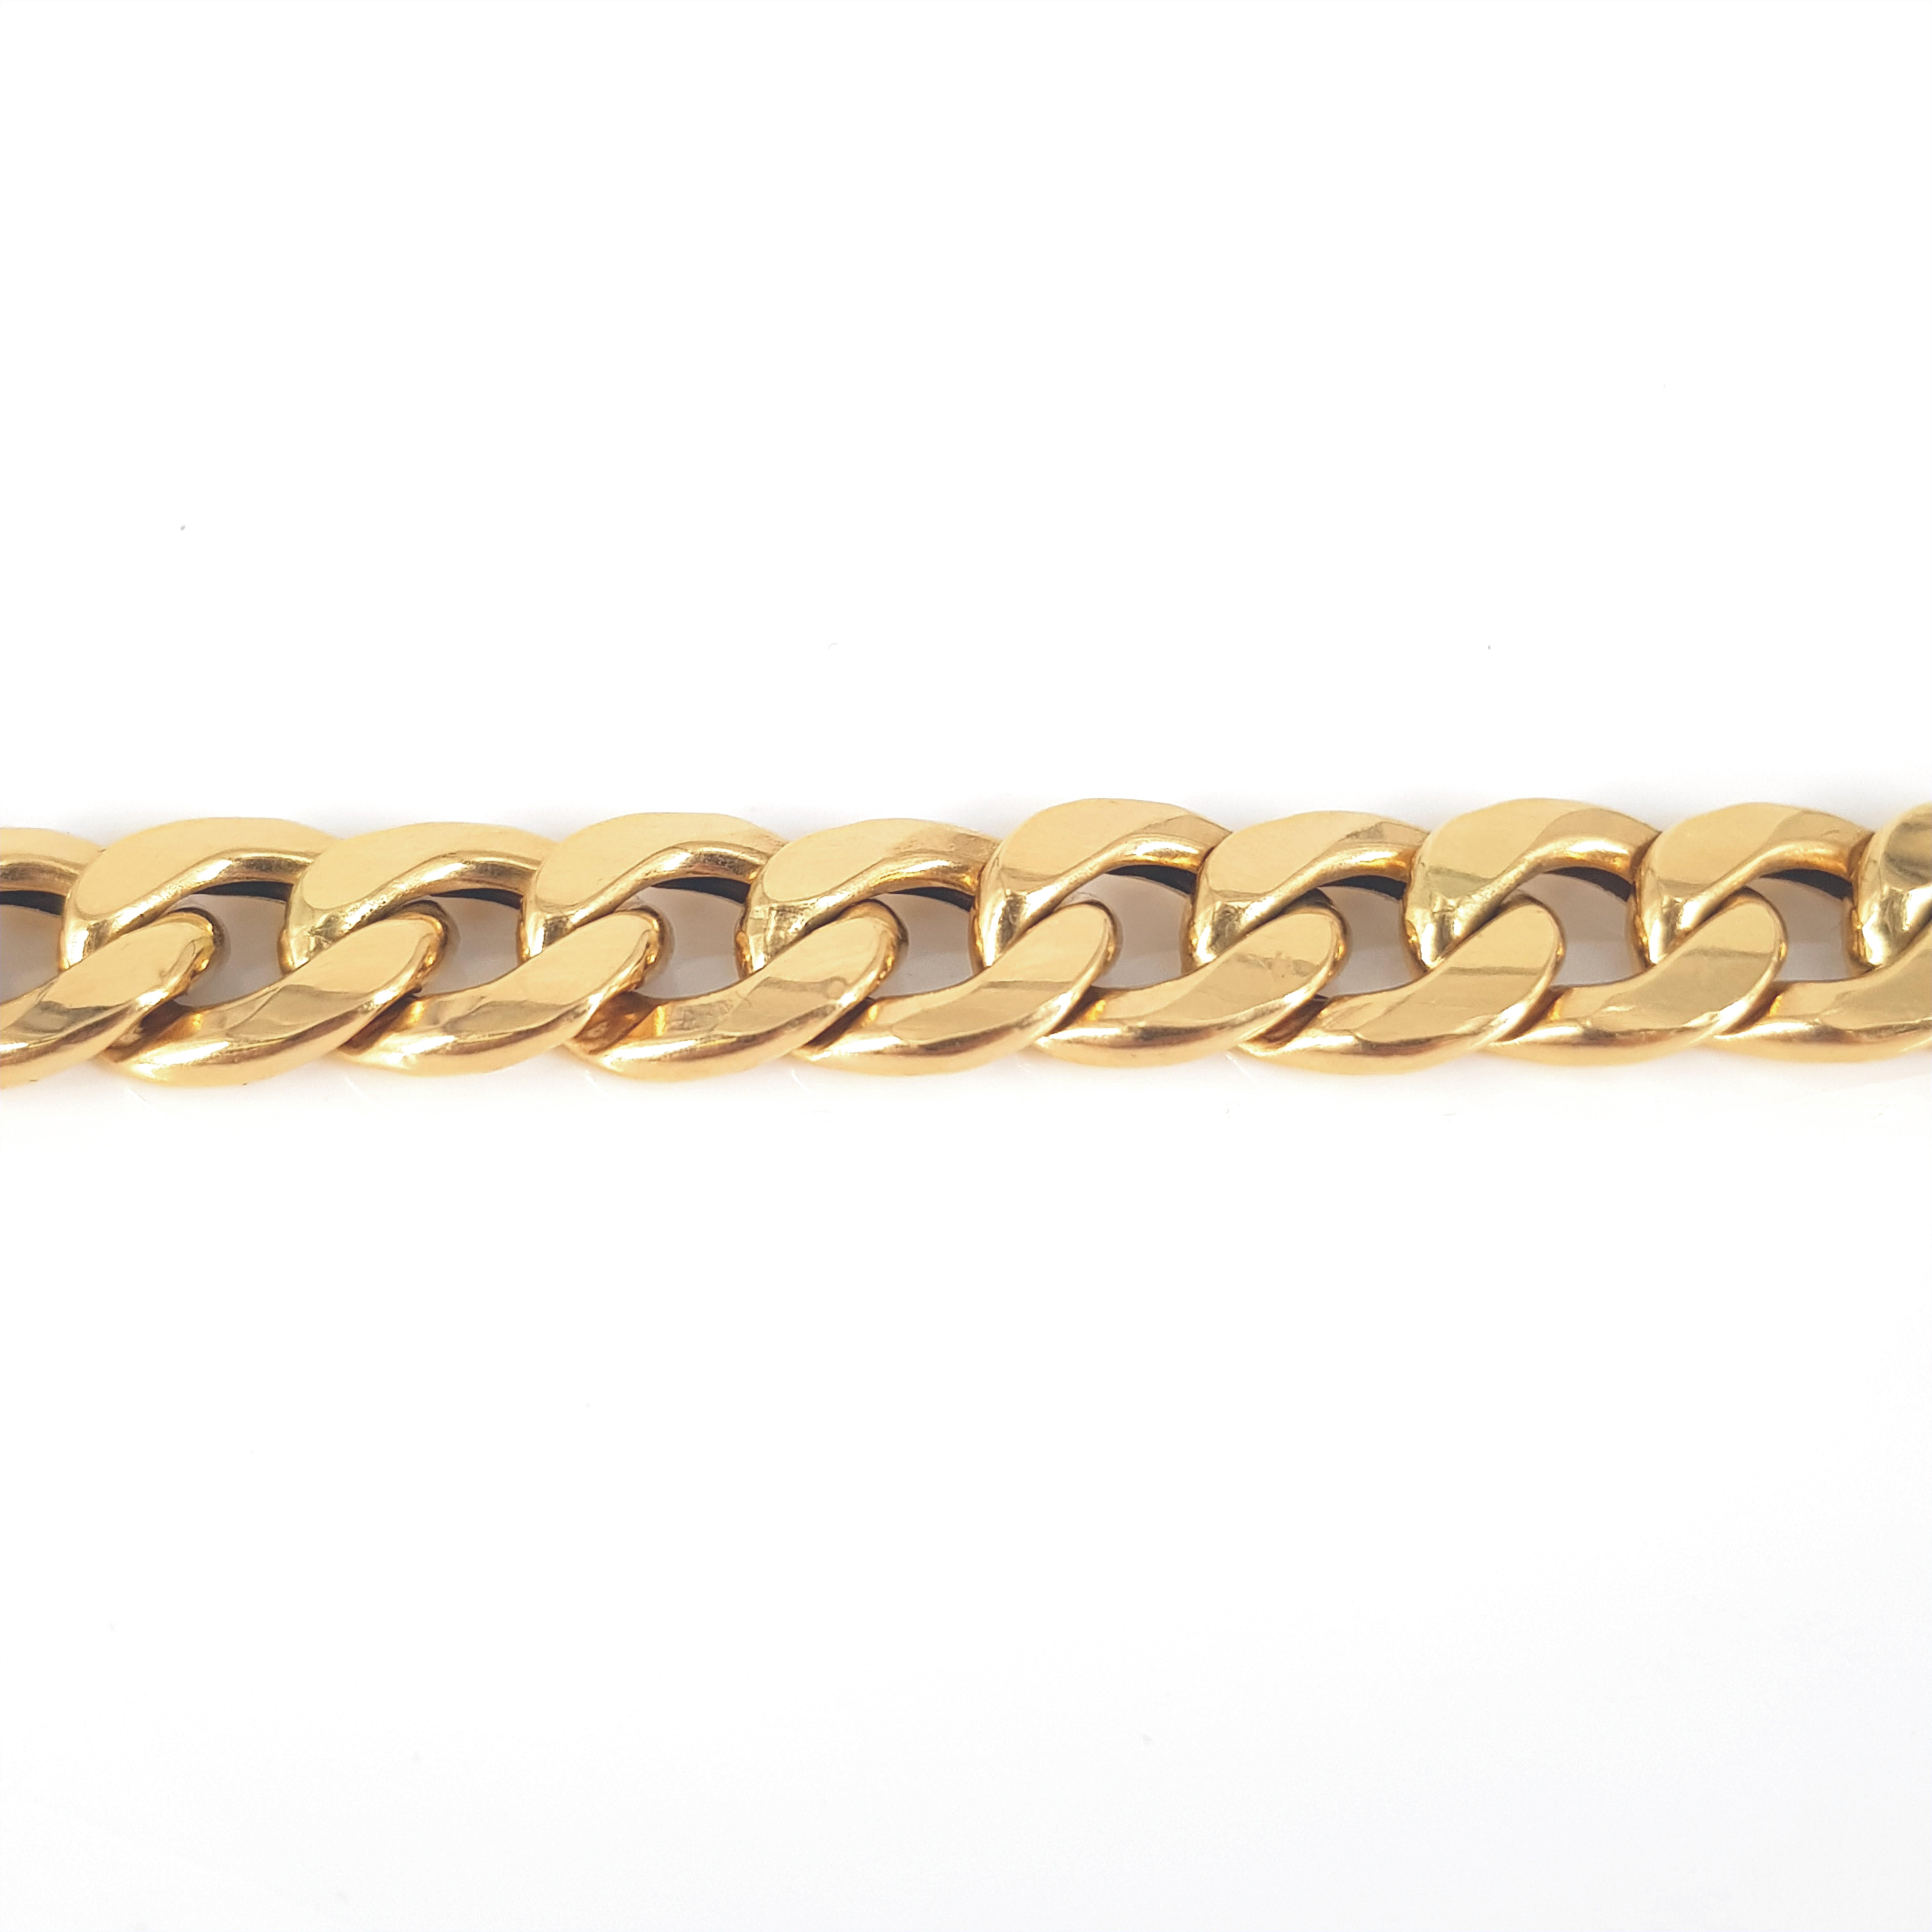 A beautiful curb link chain set in yellow gold.
Weight:                              44 grams
Metal Colour:                    Yellow
Metal:                                 18ct
Length:                               62cm
Thickness:                  